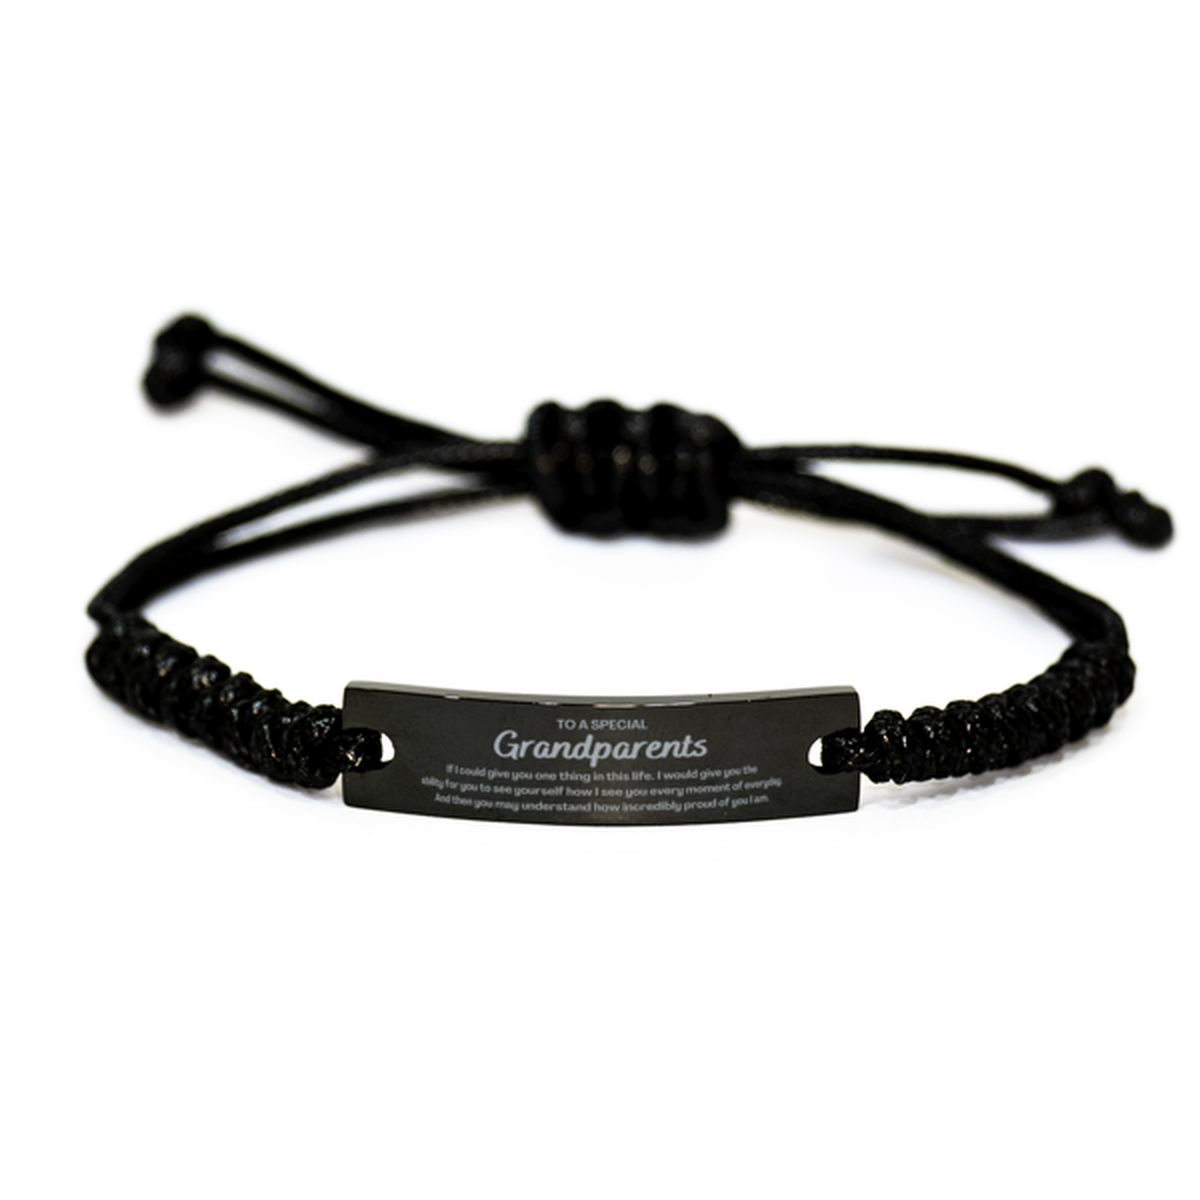 To My Grandparents Black Rope Bracelet, Gifts For Grandparents Engraved, Inspirational Gifts for Christmas Birthday, Epic Gifts for Grandparents To A Special Grandparents how incredibly proud of you I am